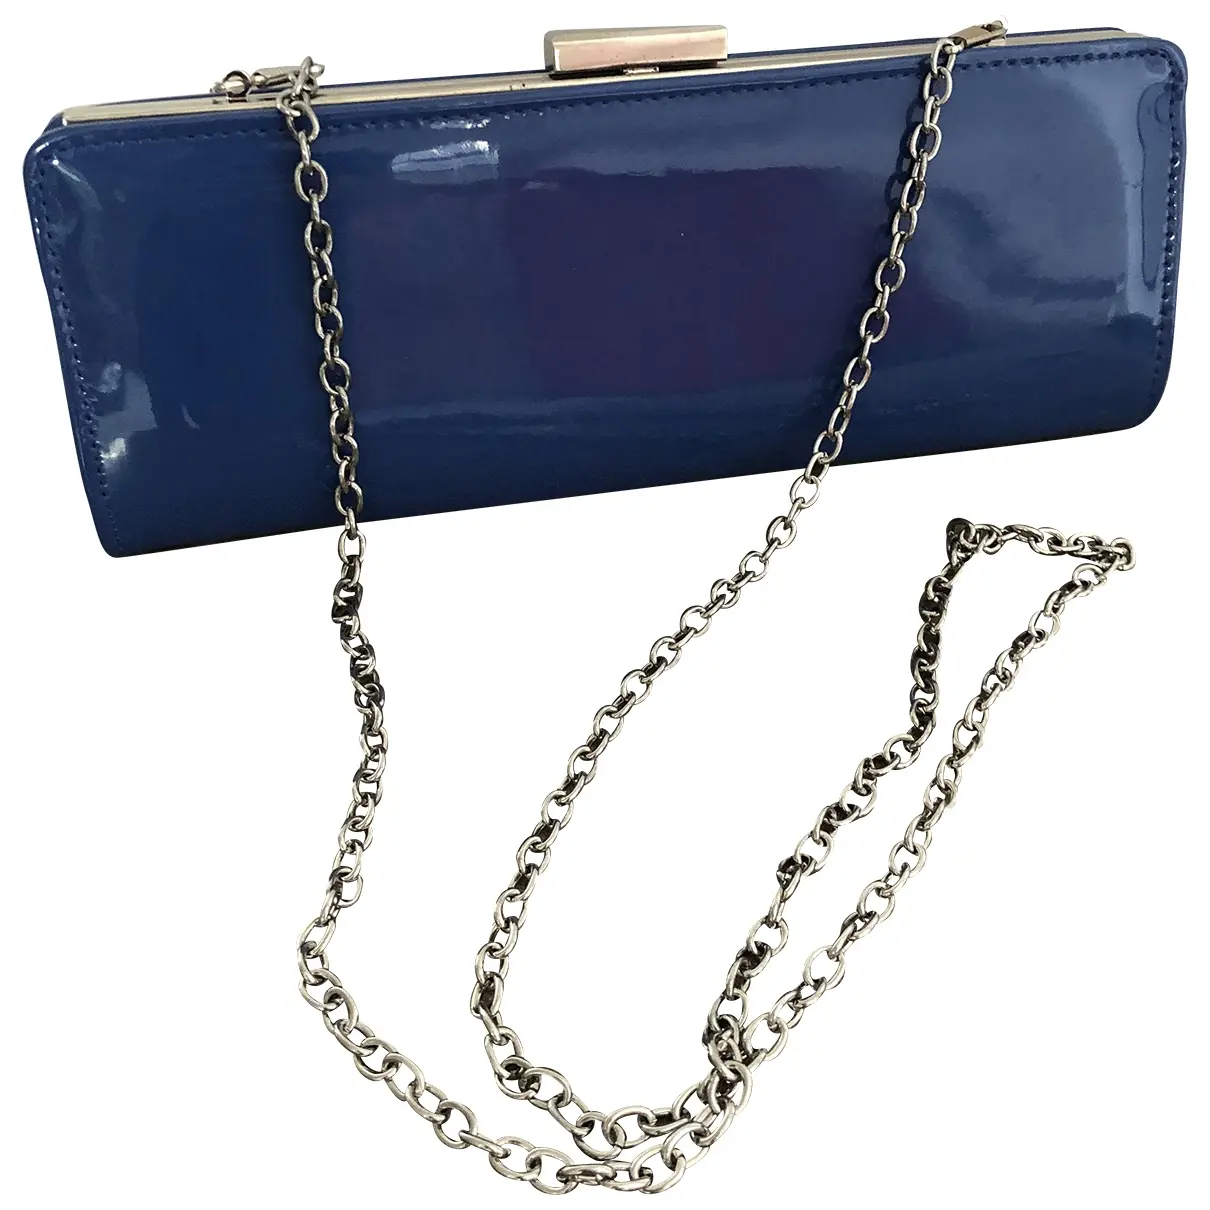 Patent leather clutch bag Costume National